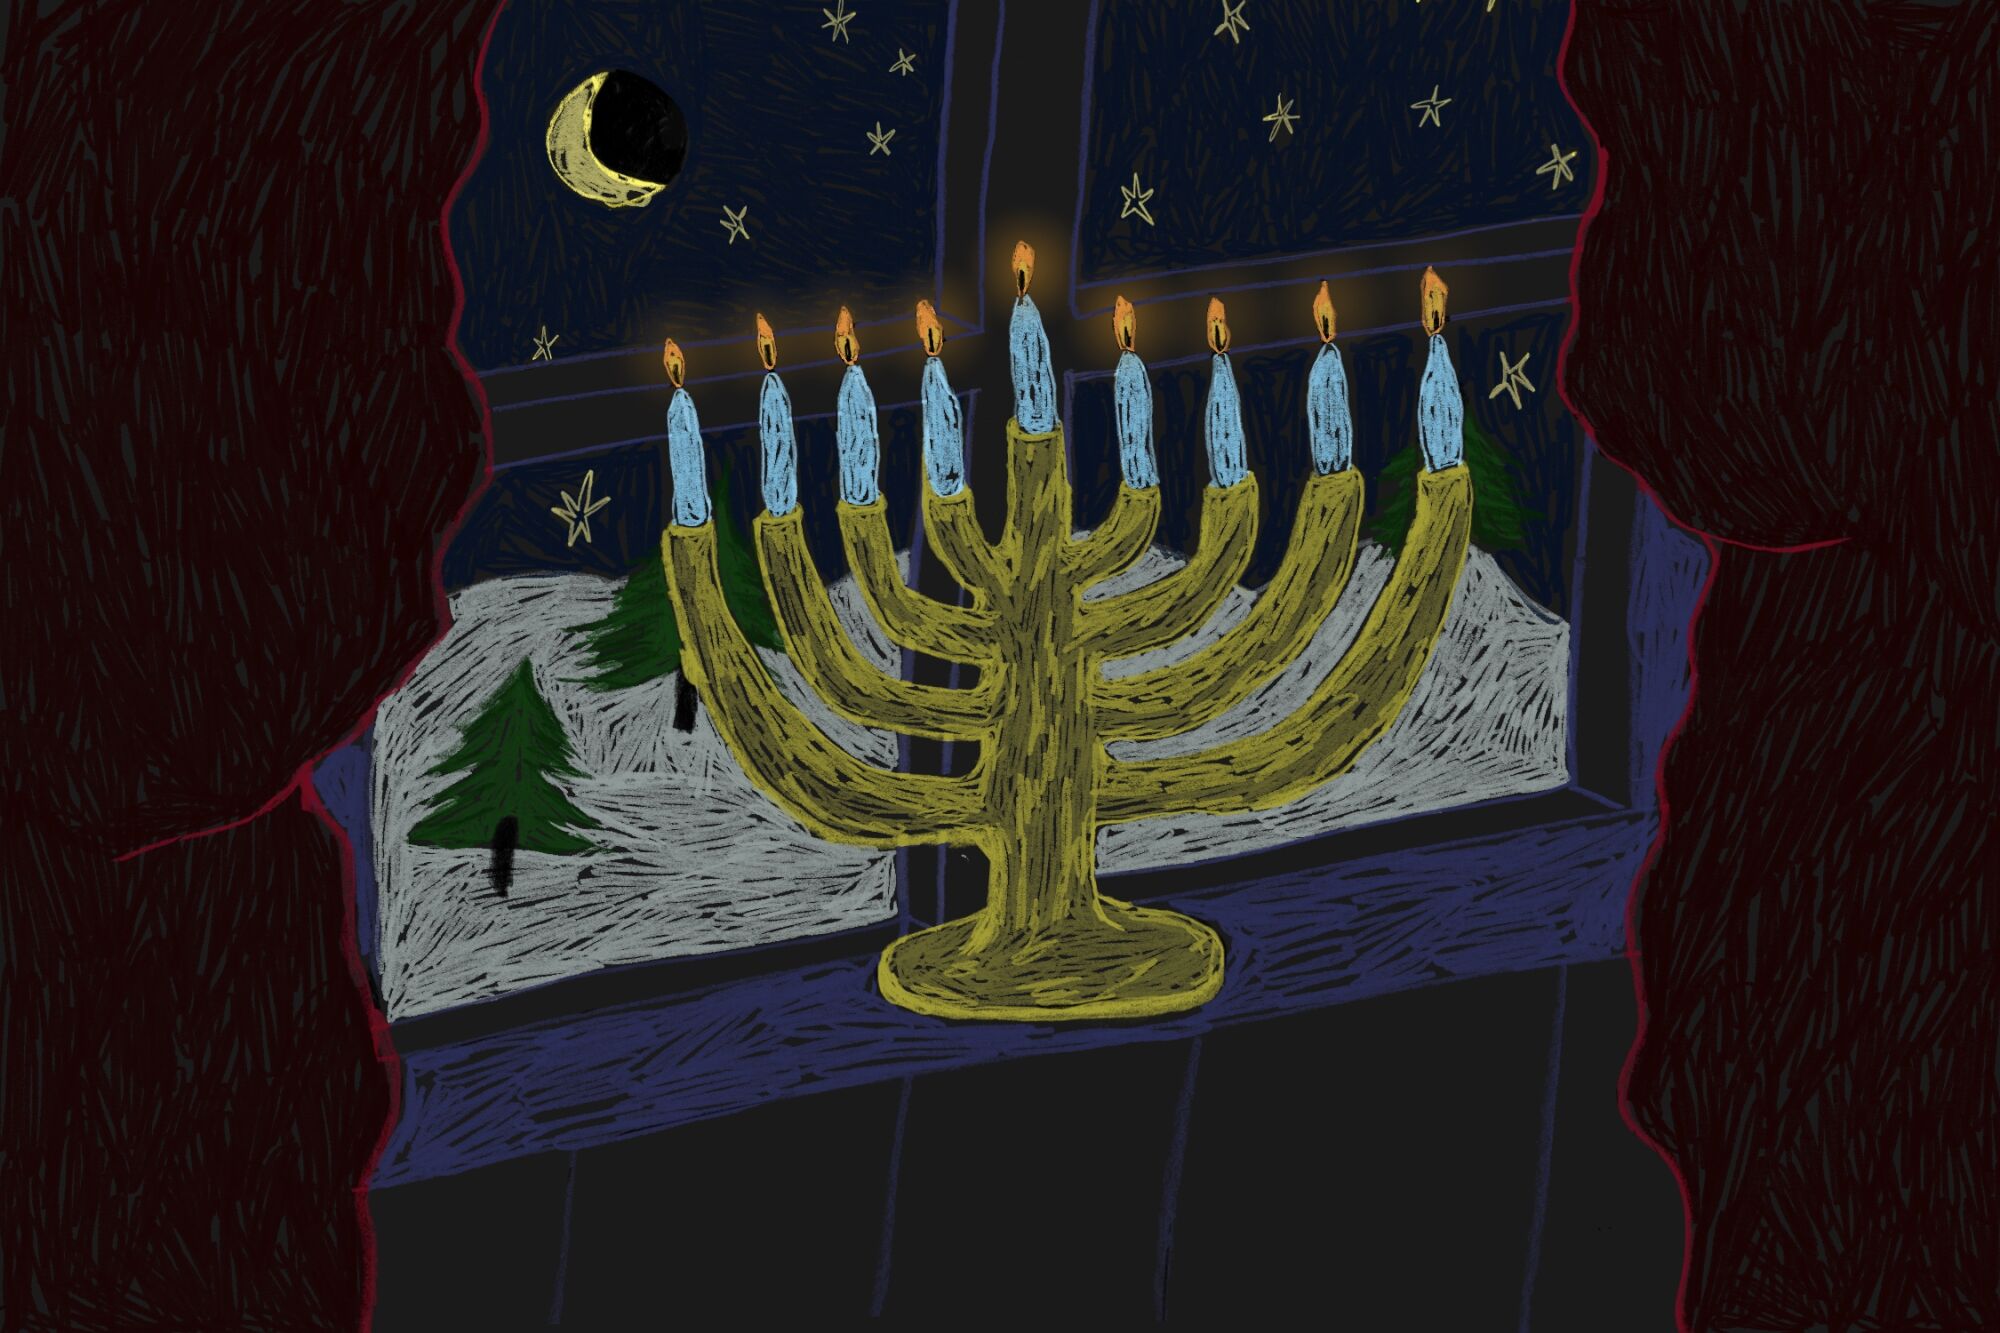 A menorah in front of a window through which snowy moonlit hills are visible.